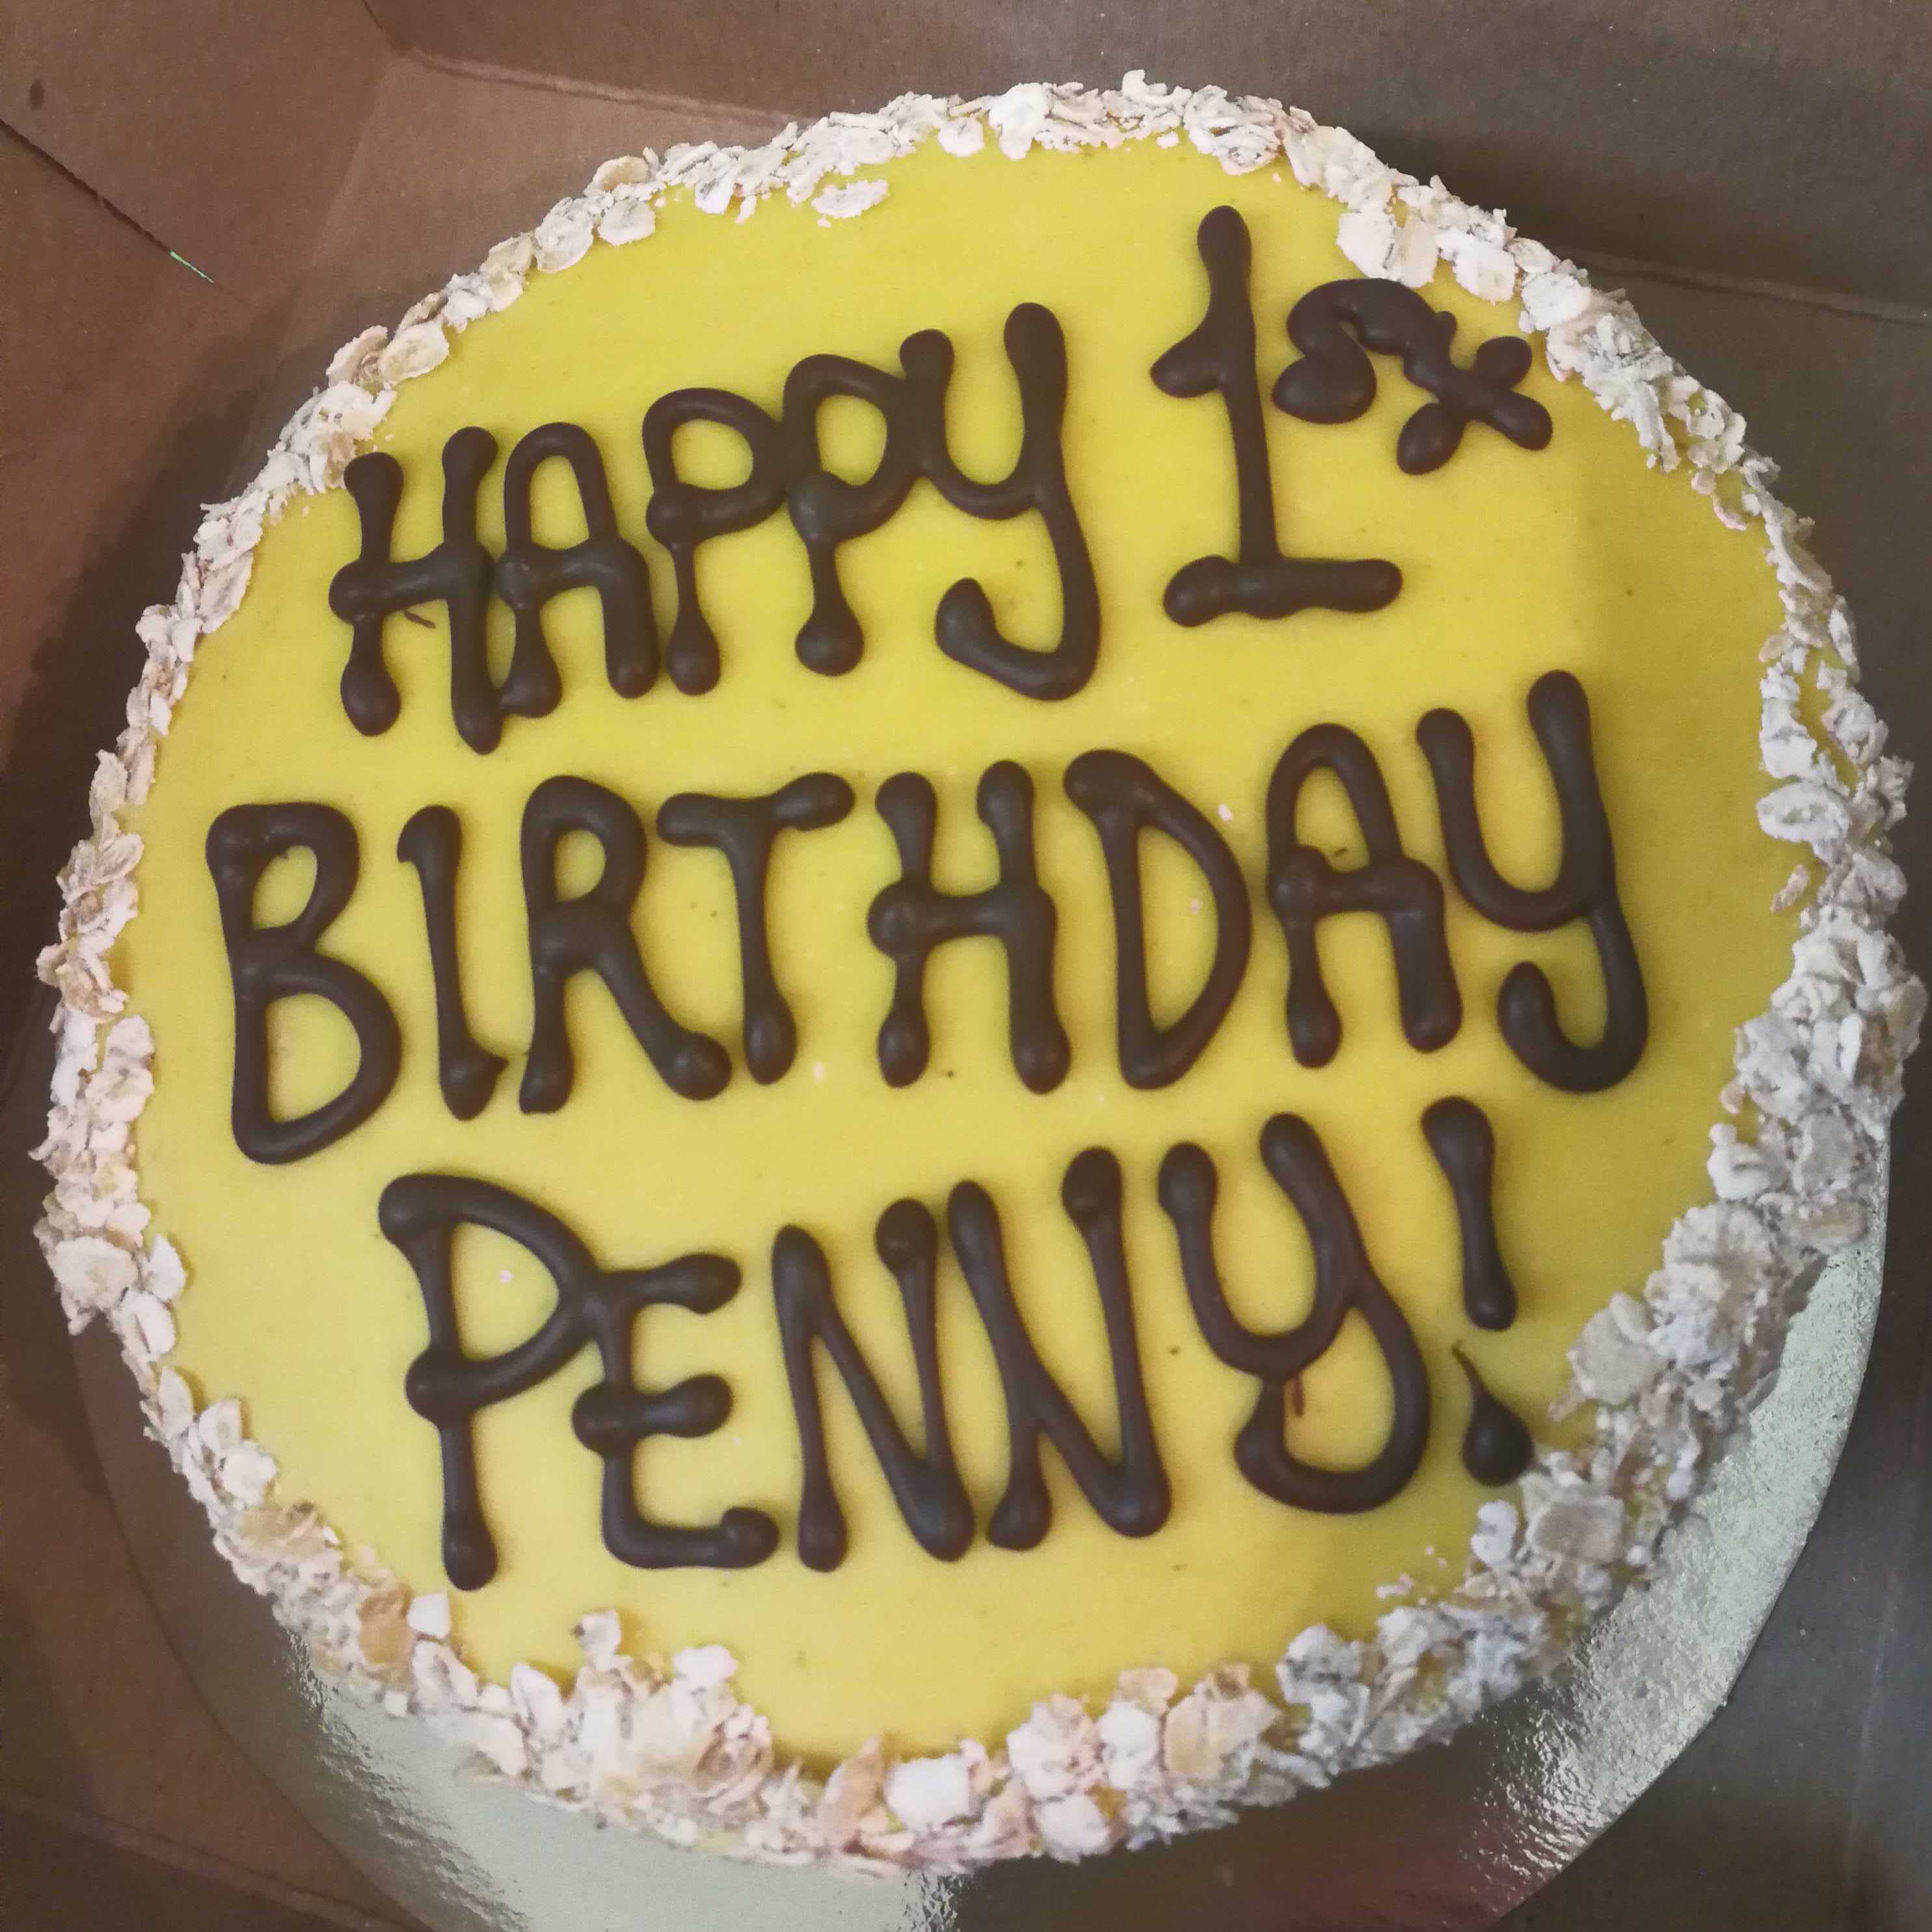 Melbourne Custom Cakes | Miss Penny Cakes | Finest Cake Specialist in  Melbourne | Beautiful Custom Made Cakes, Cafe and Cake Shop Melbourne VIC,  Parkville, Moonee Ponds, Pascoe Vale South, Grantham, Pearson |